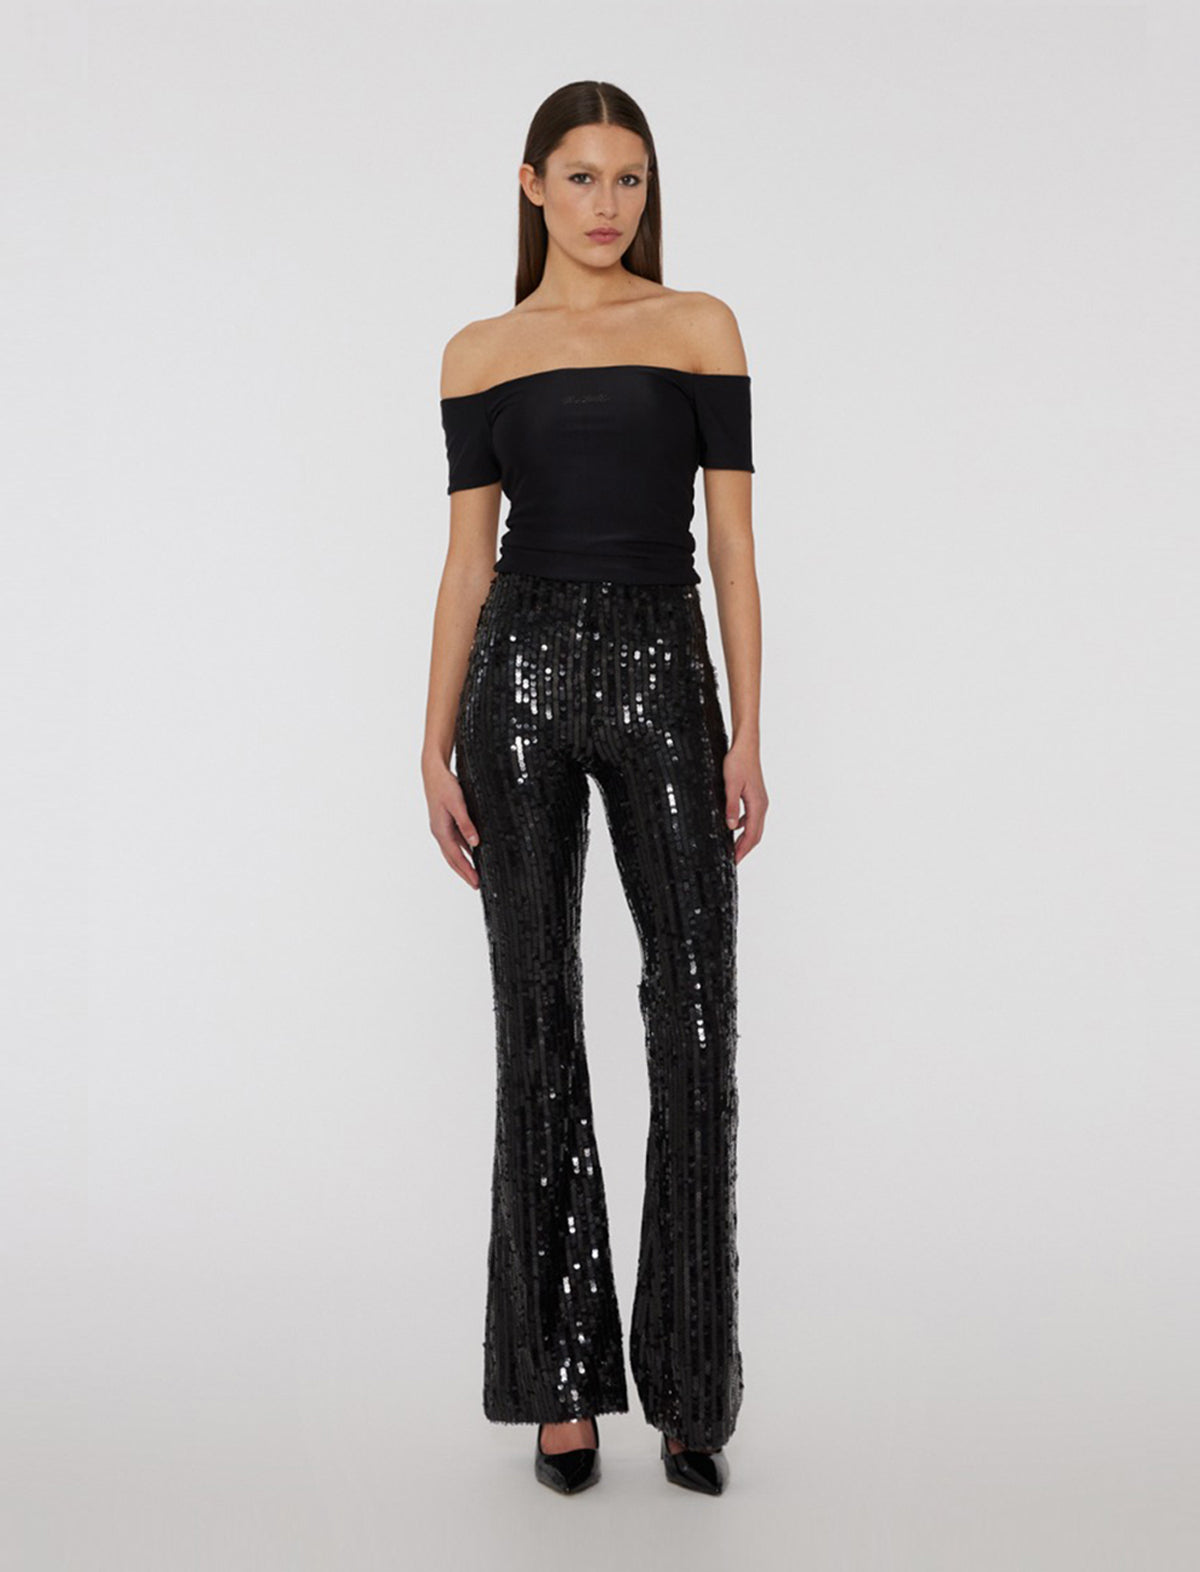 ROTATE BIRGER CHRISTENSEN Sequined Flare Pants in Black